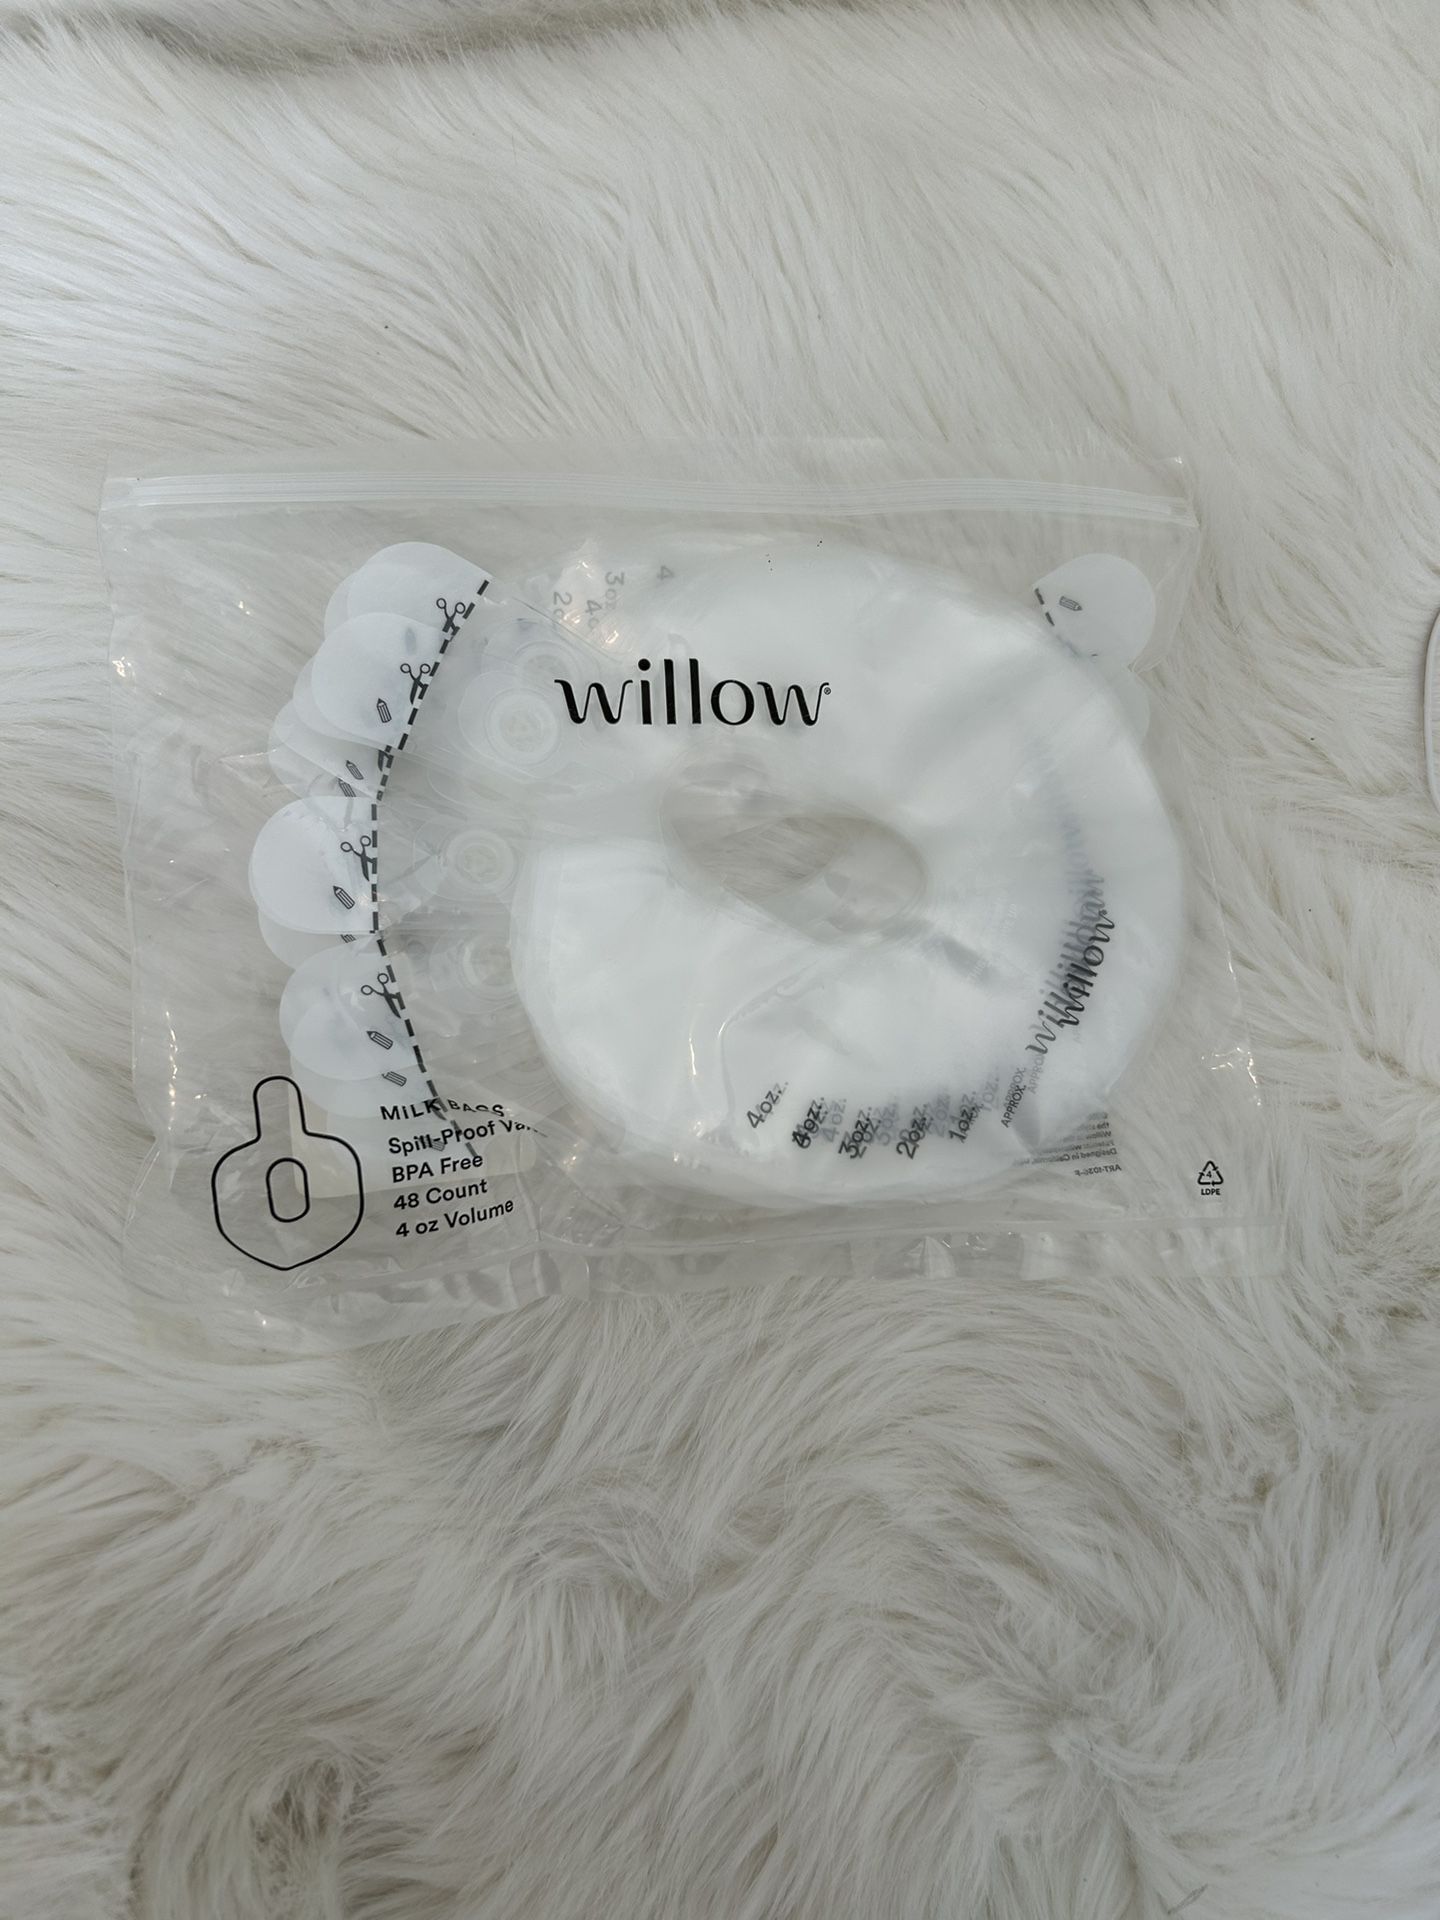 Willow Pump Milk Bags Never Opened